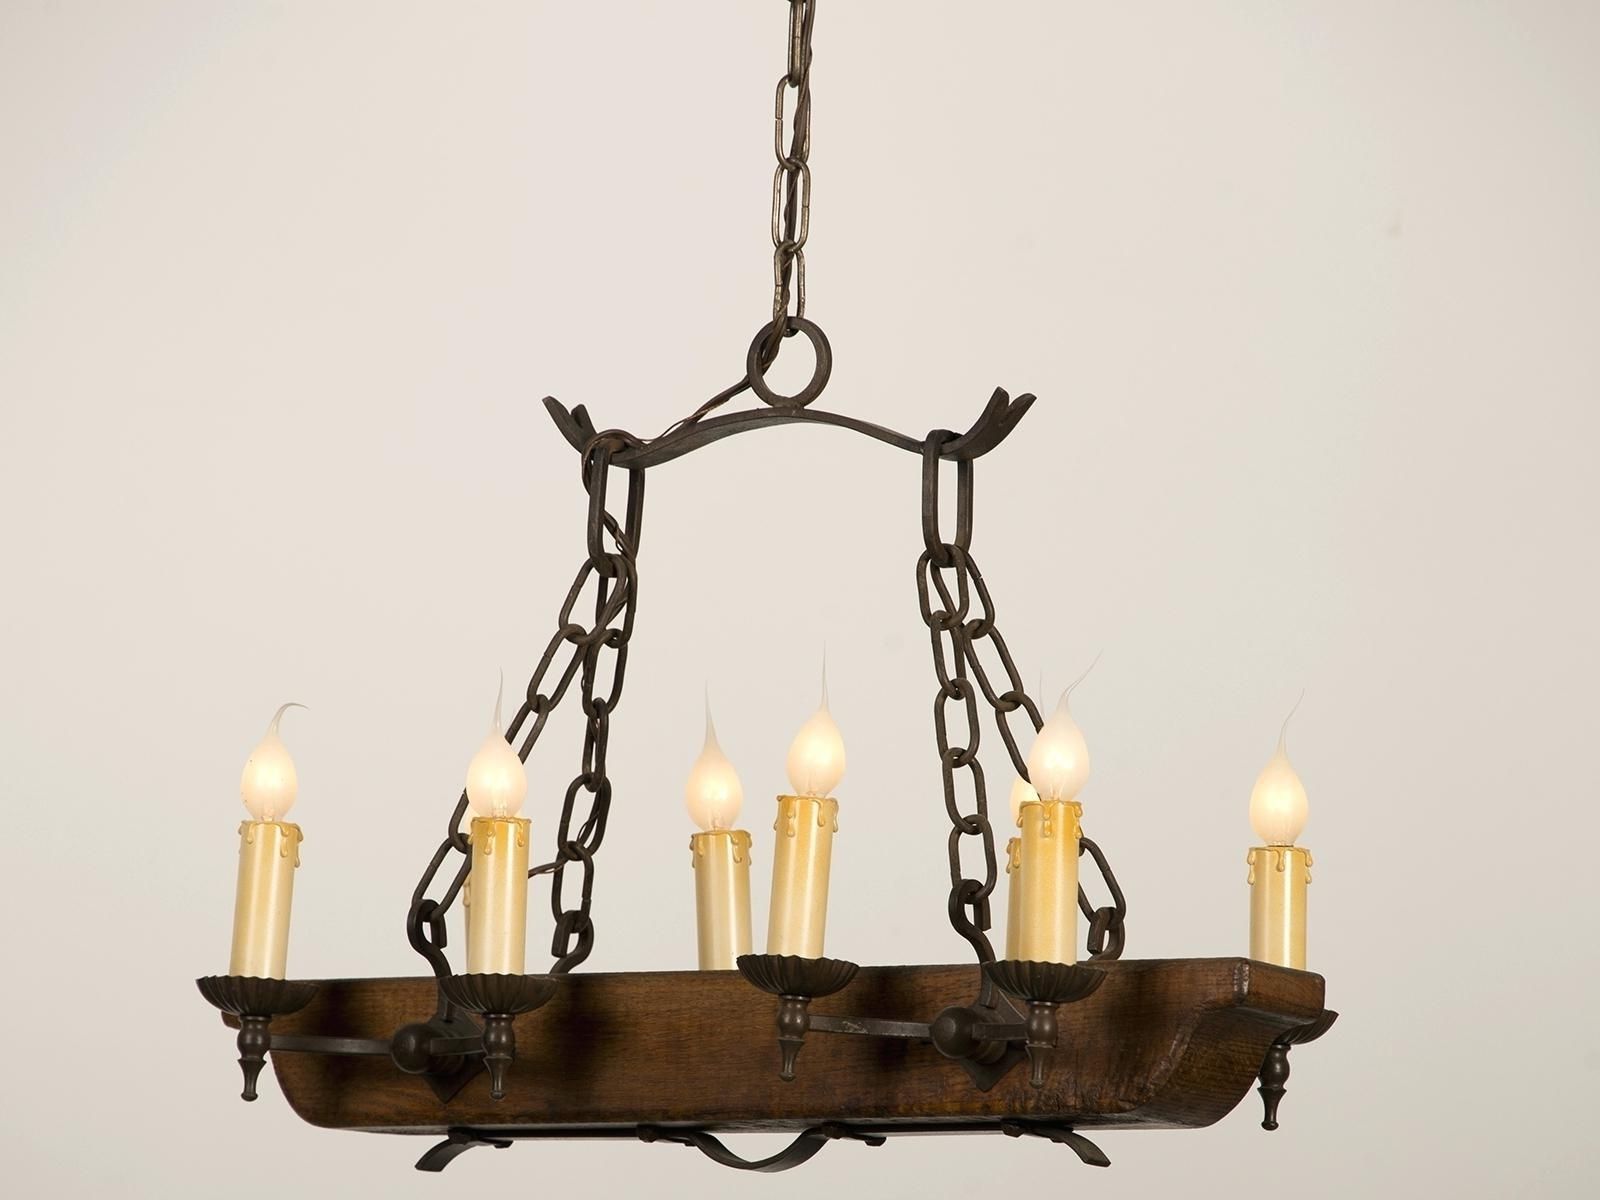 The Best Wooden Wine Barrel Chandelier French Oak Design Pict Of Pertaining To Preferred Wooden Chandeliers (View 9 of 15)